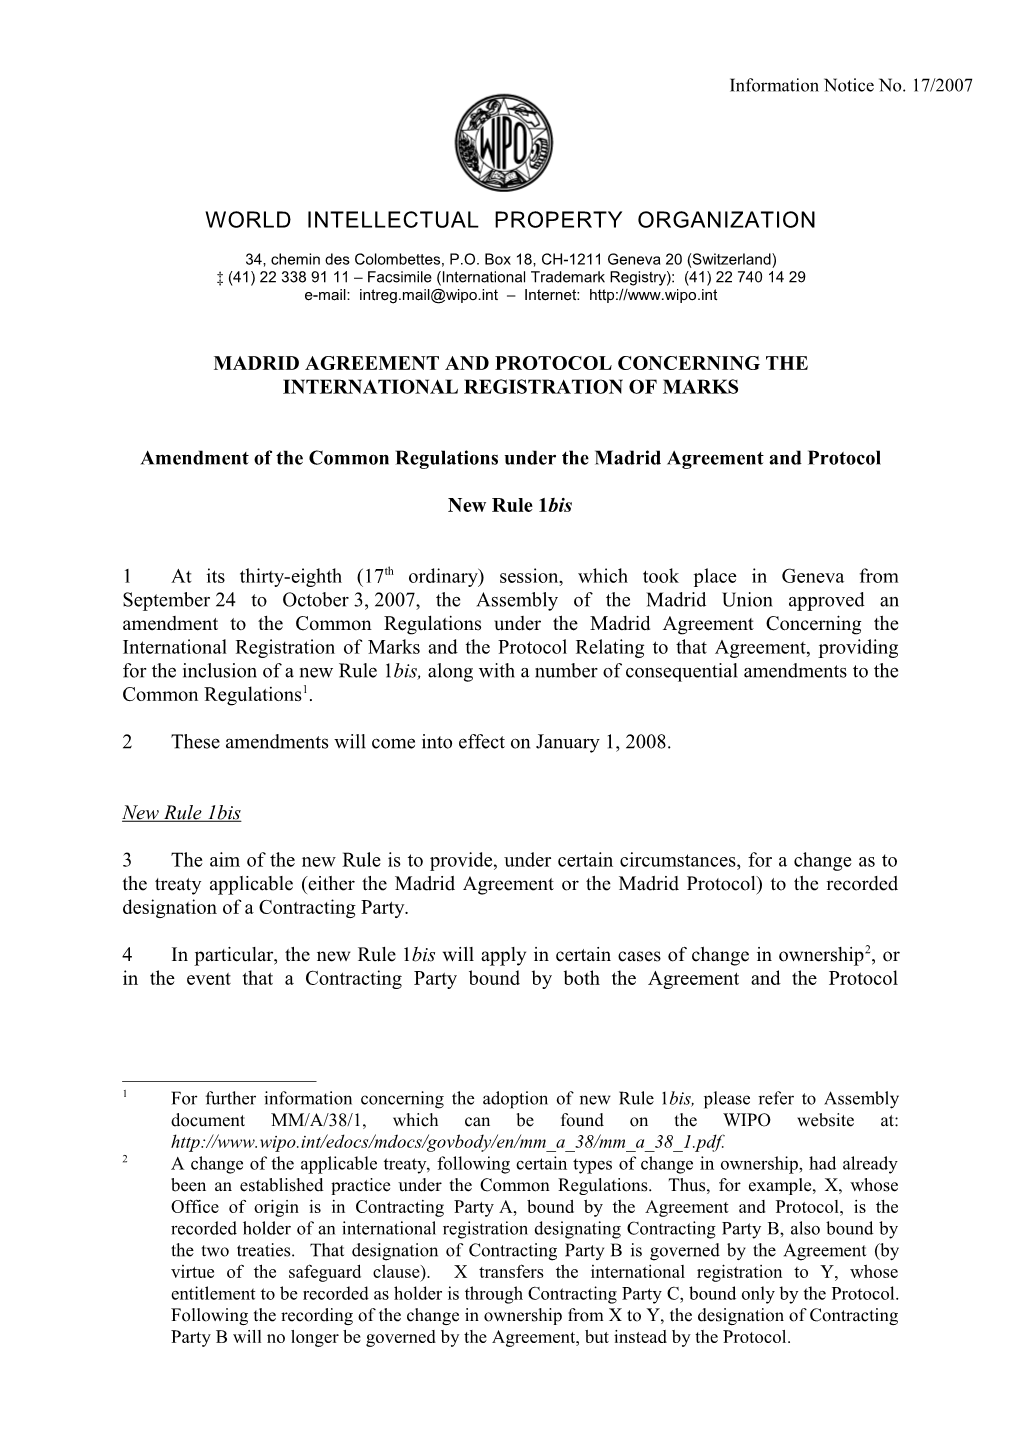 MADRID/2007/17 : Amendment of the Common Regulations Under the Madrid Agreement and Protocol